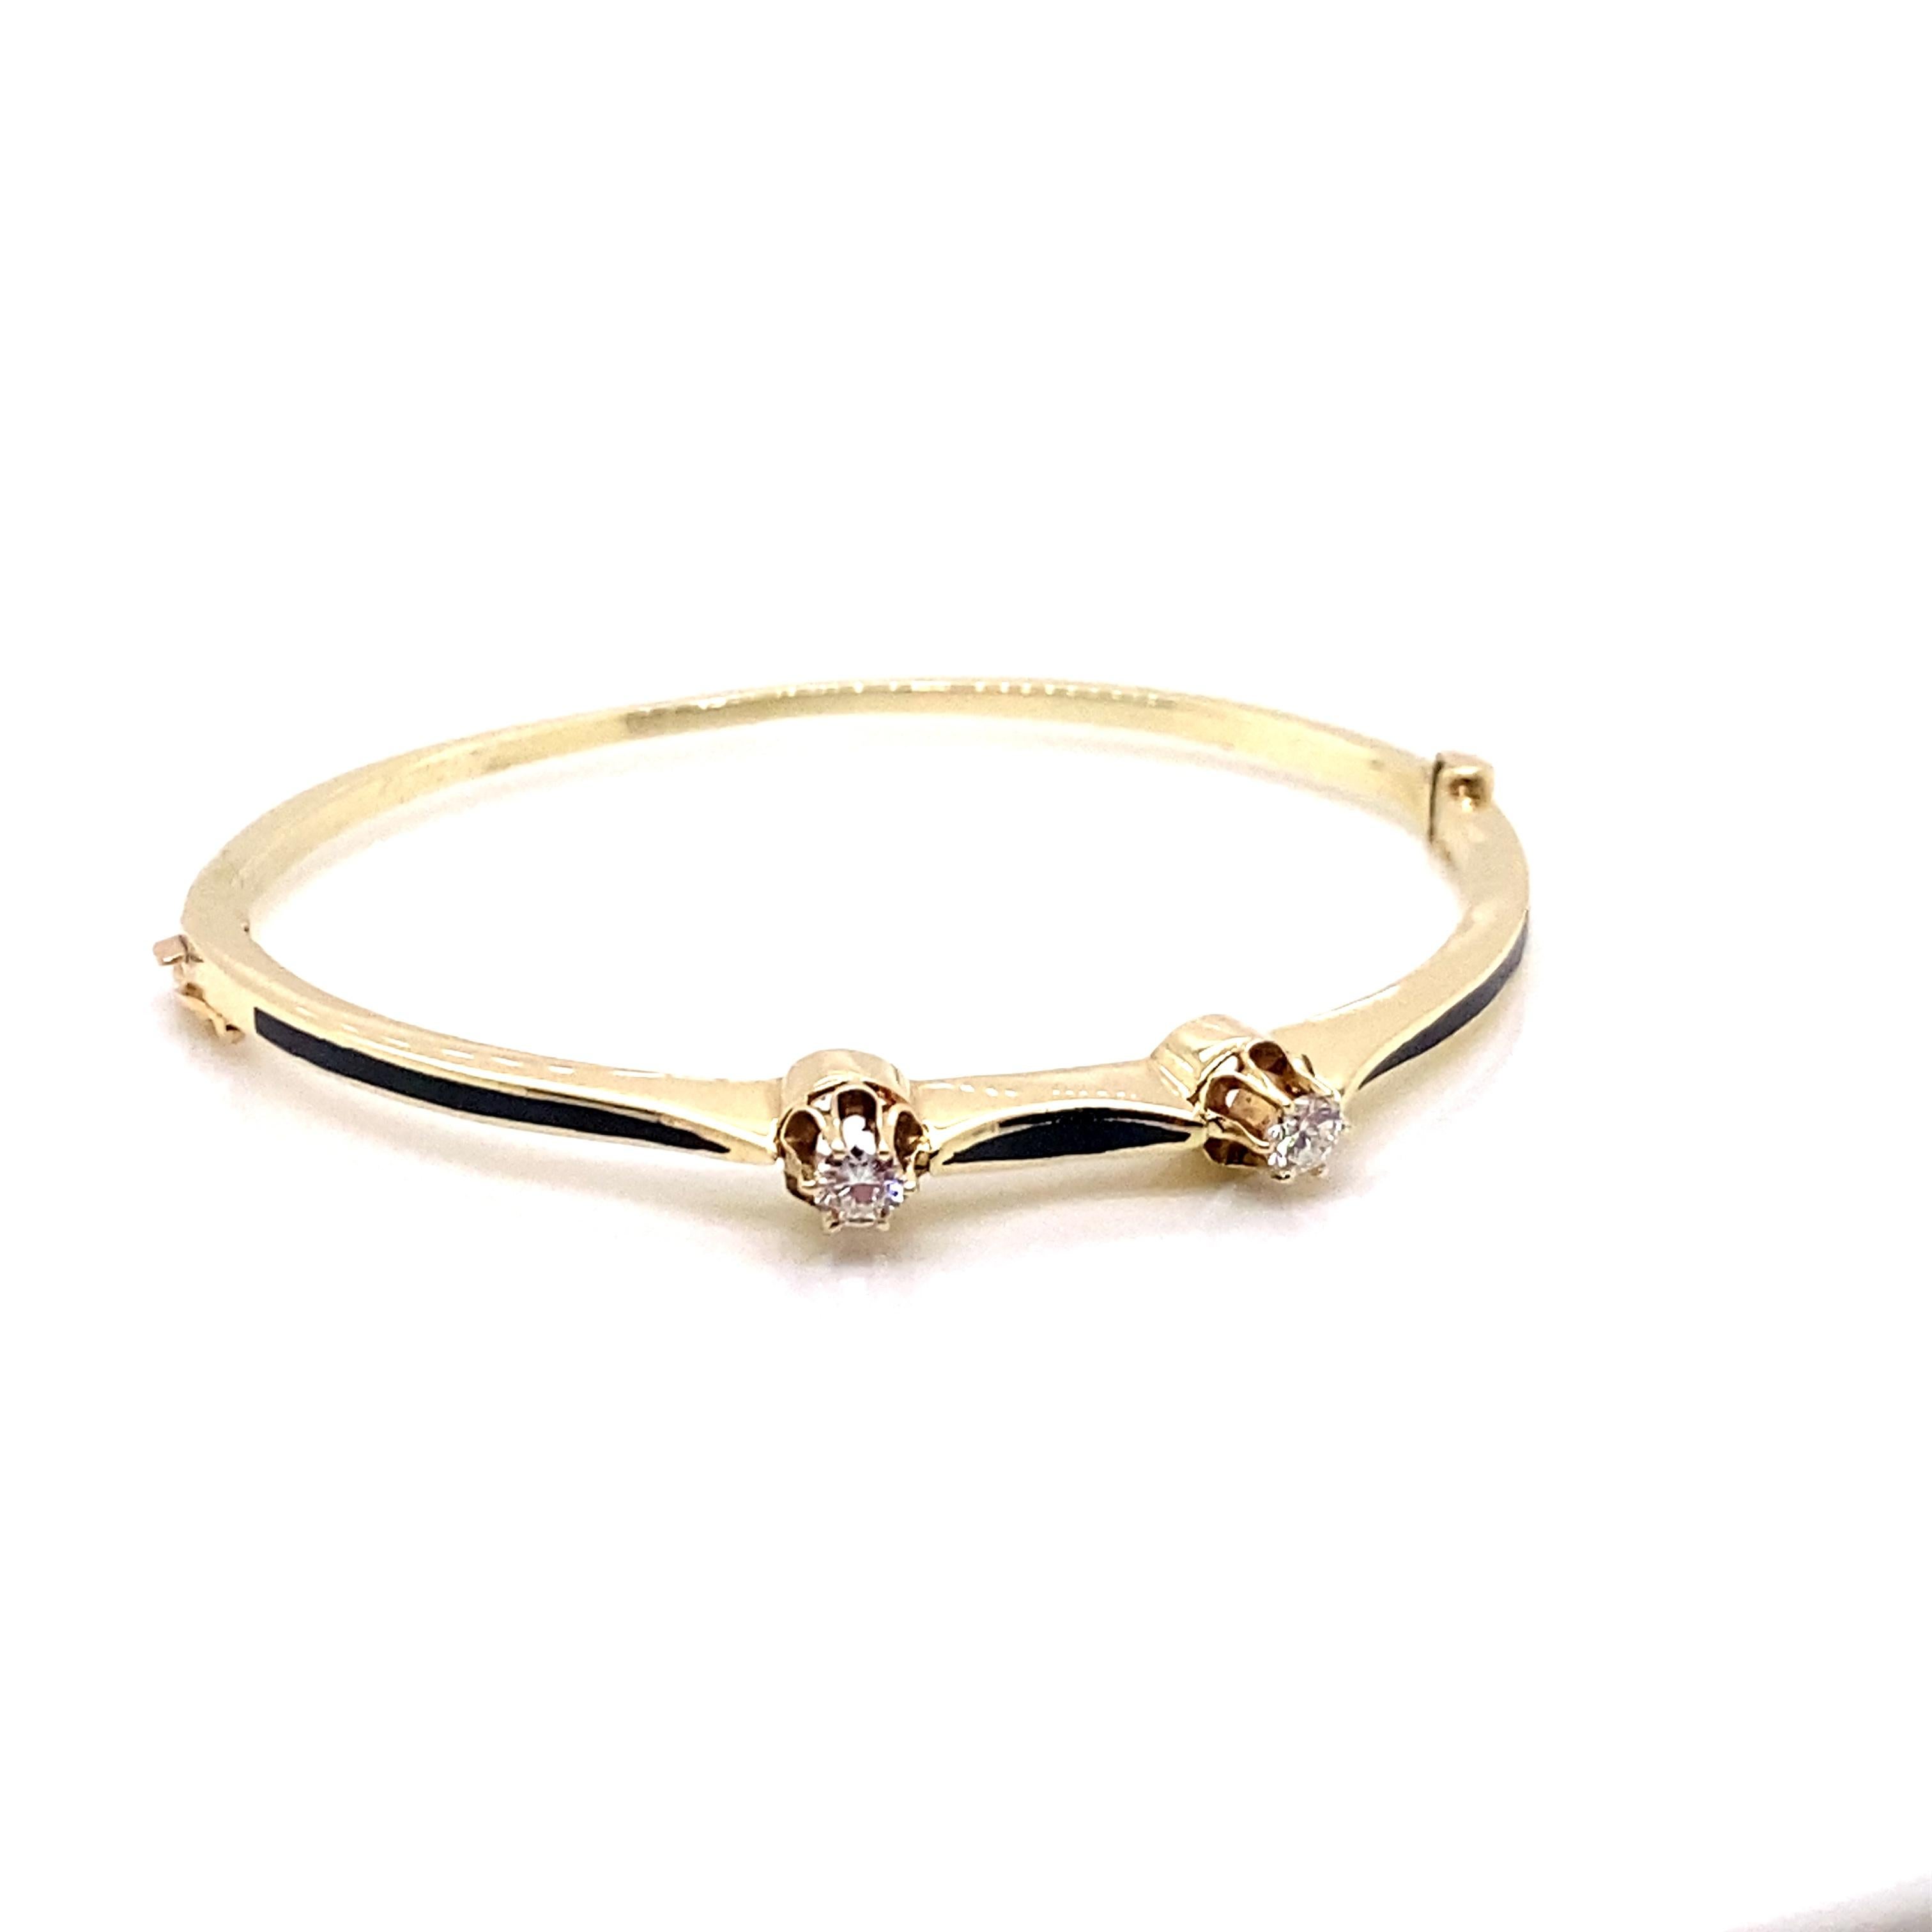 Vintage Victorian Reproduction Diamond and Black Enamel Bangle In Good Condition For Sale In Boston, MA